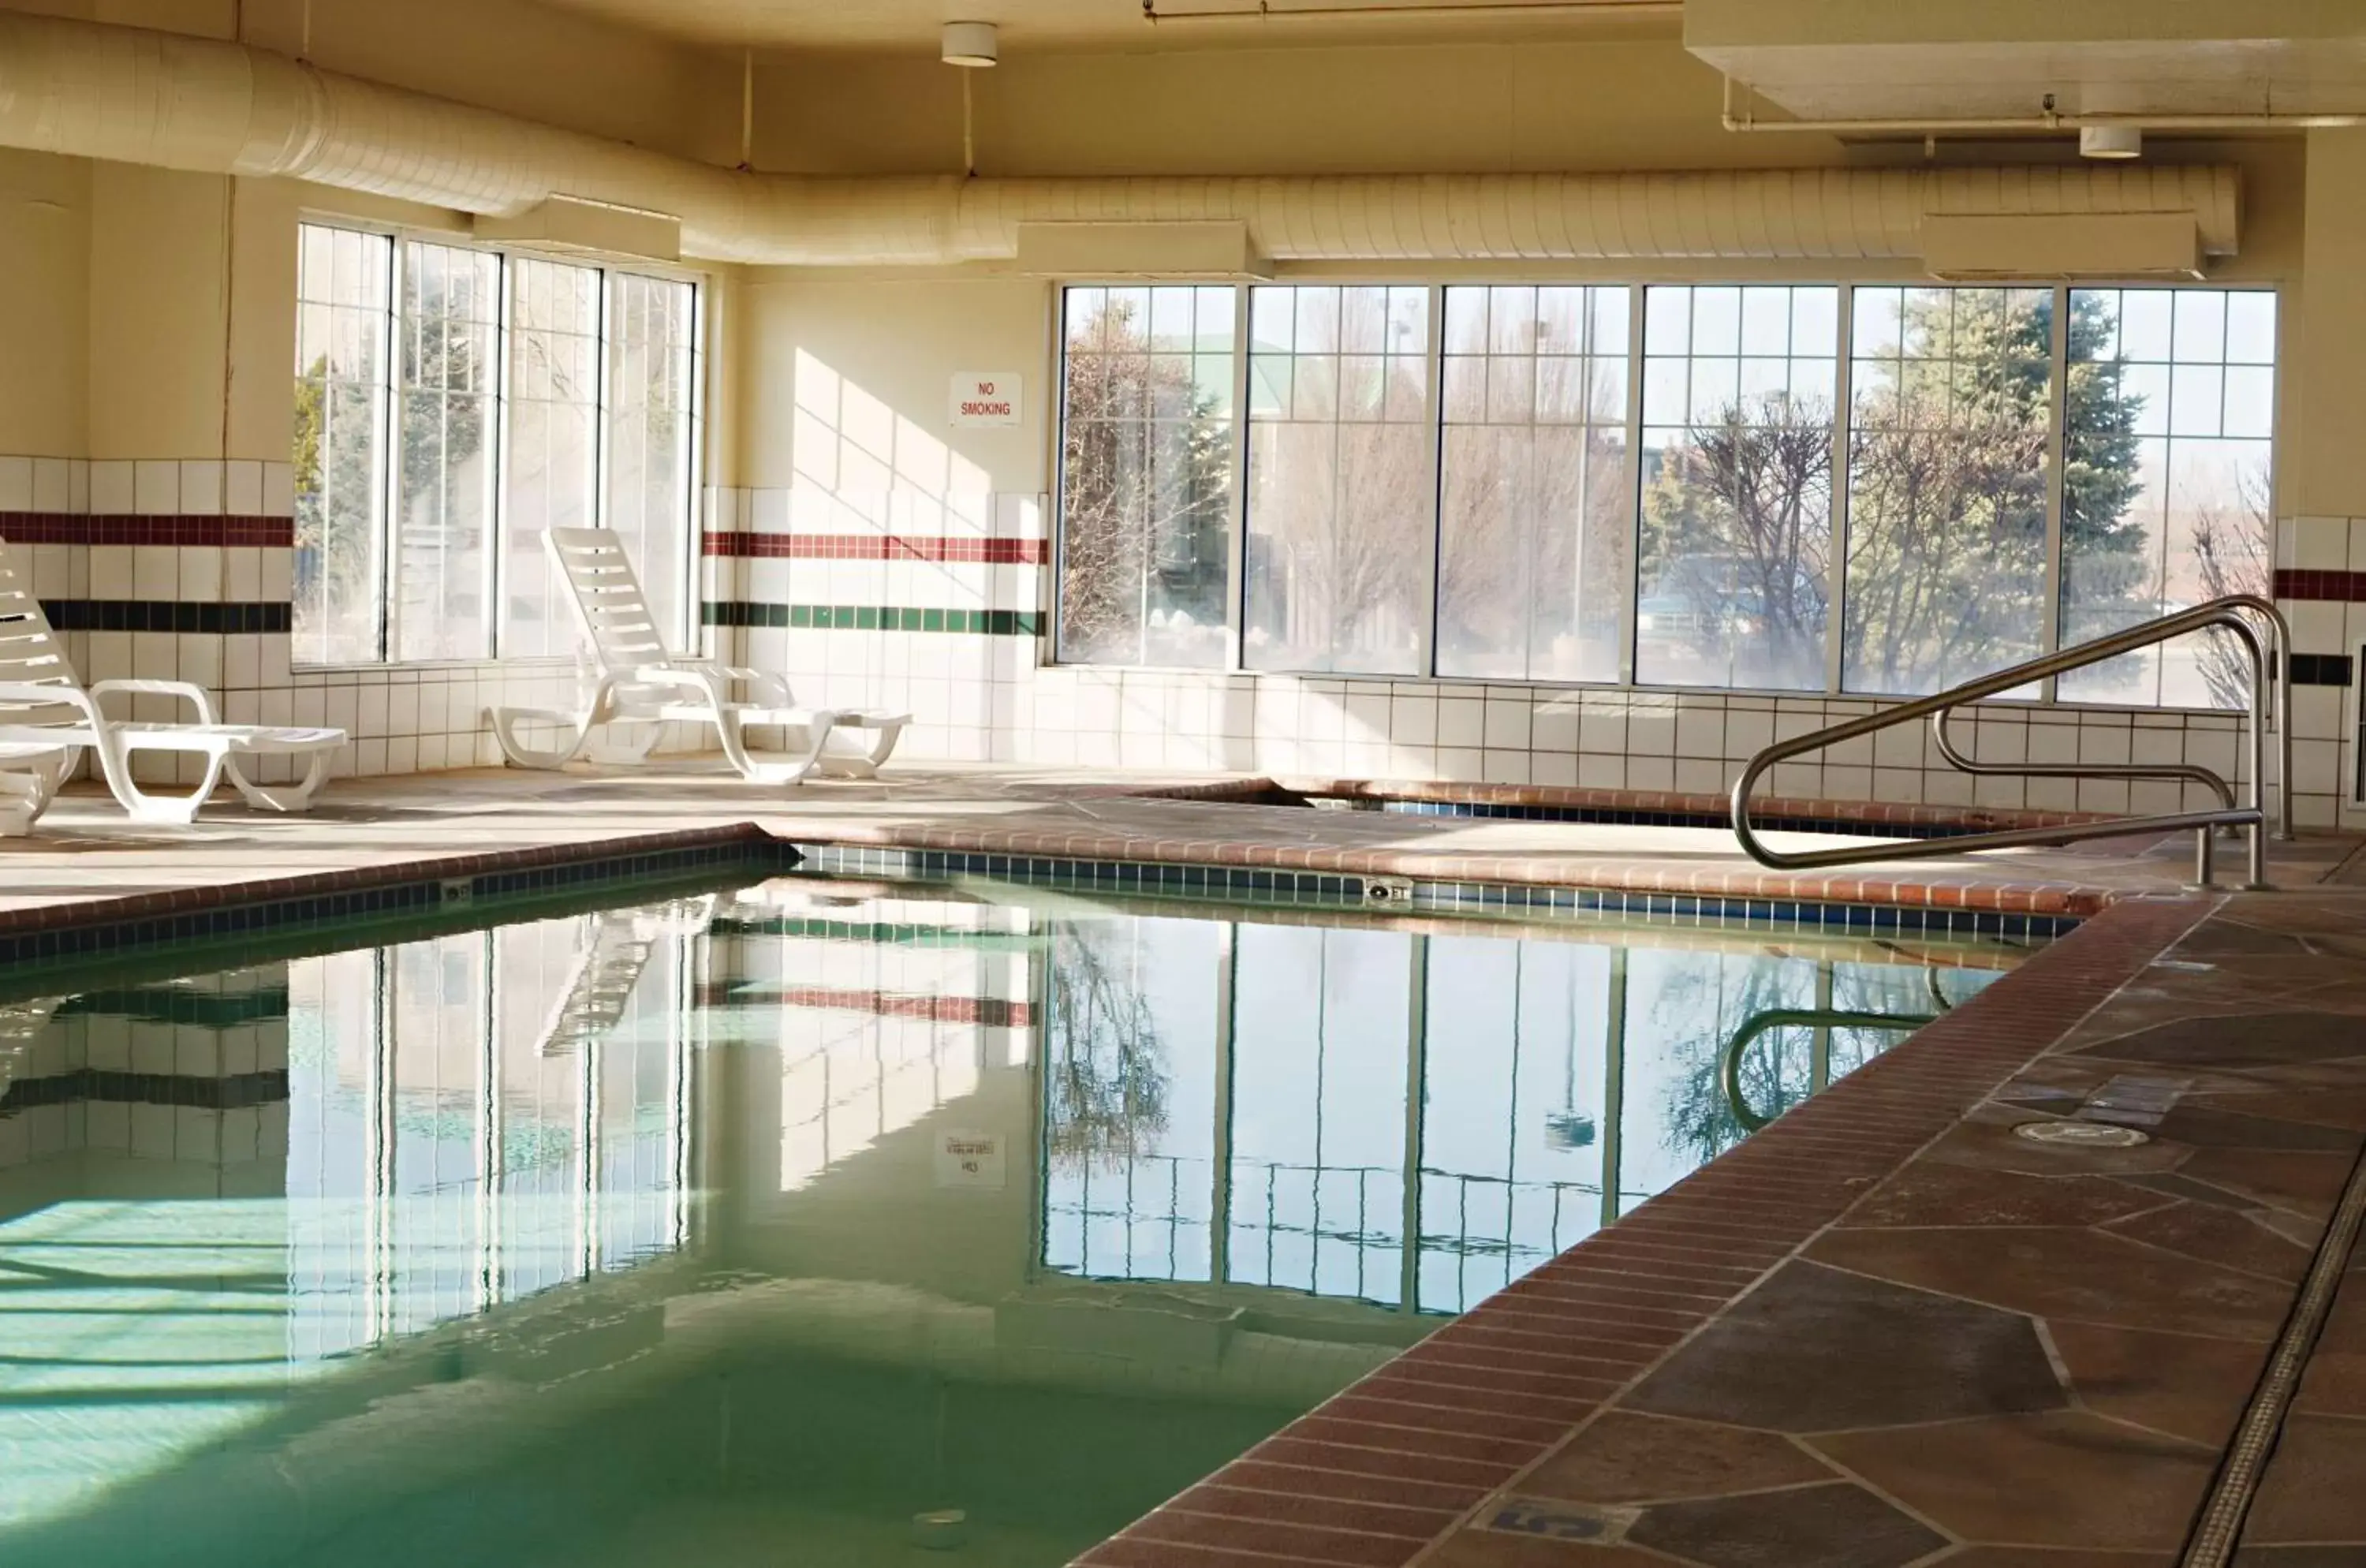 On site, Swimming Pool in Country Inn & Suites by Radisson, West Valley City, UT